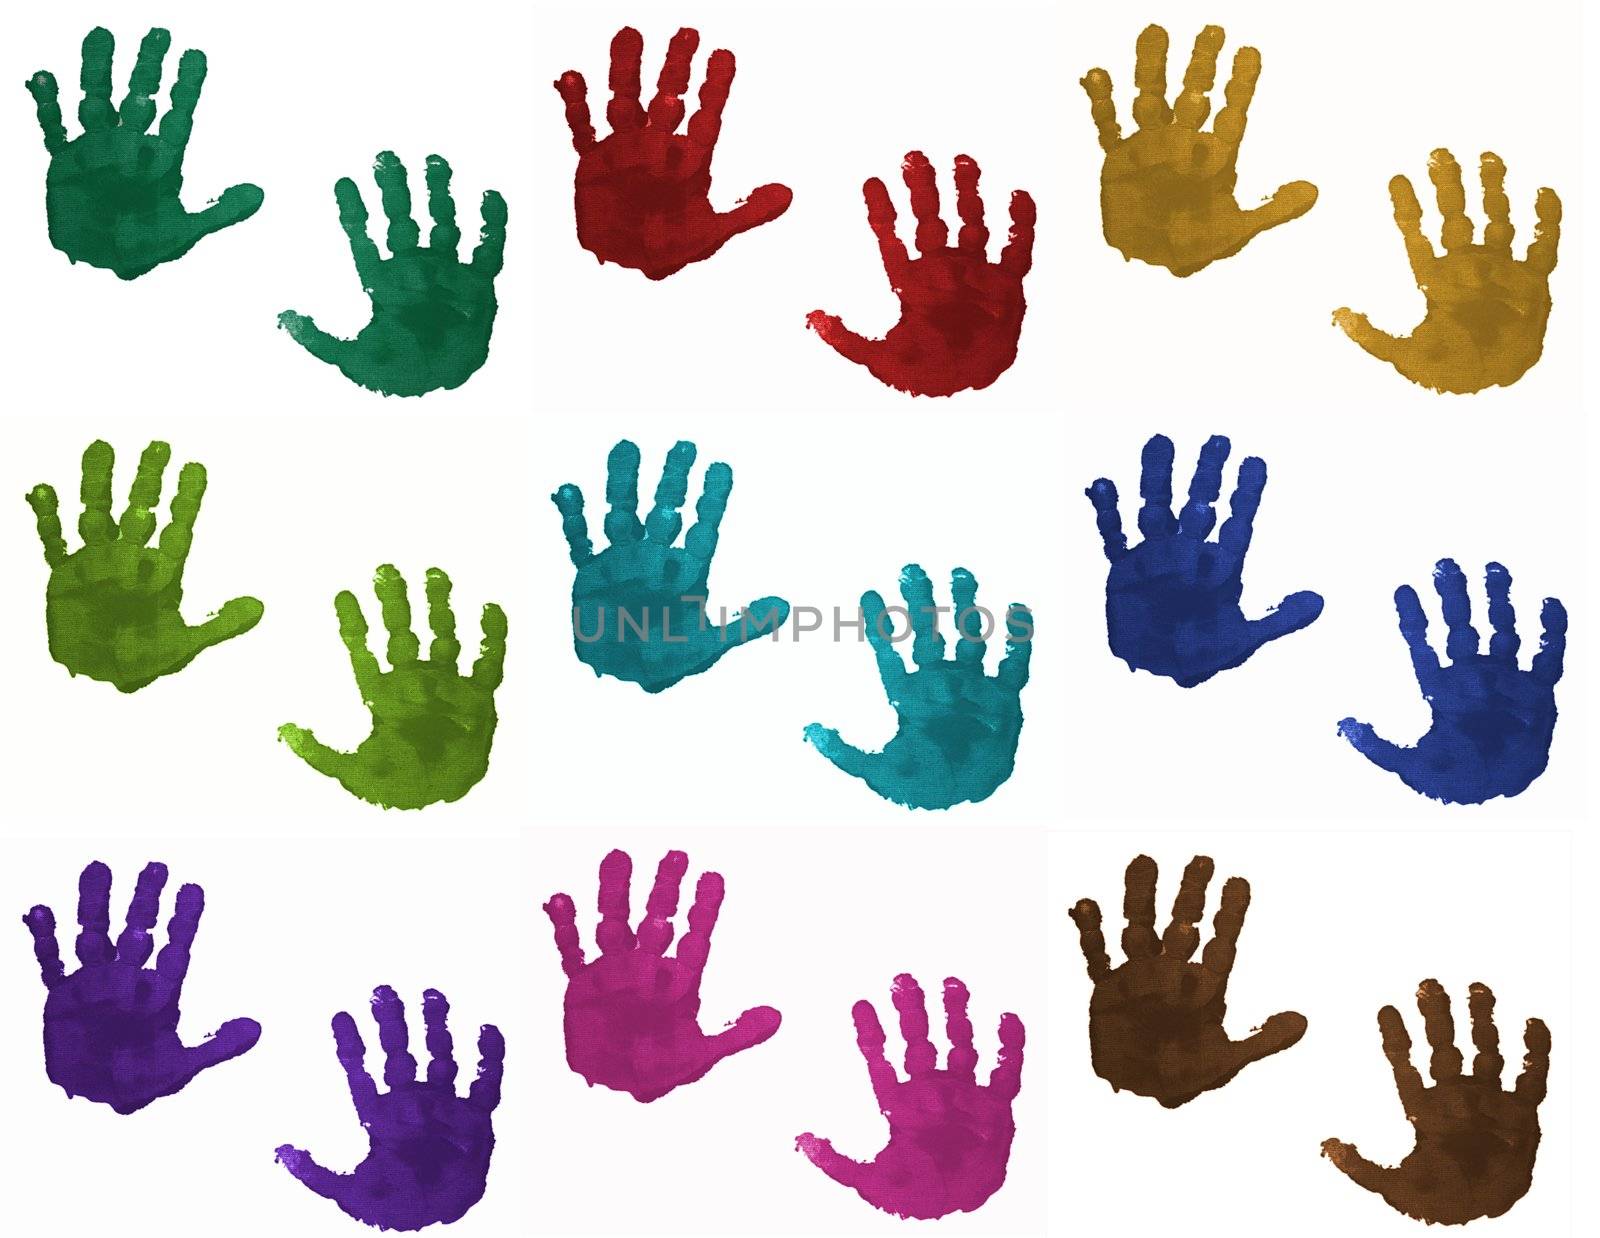 Children's hand prints in different colors isolated on white background